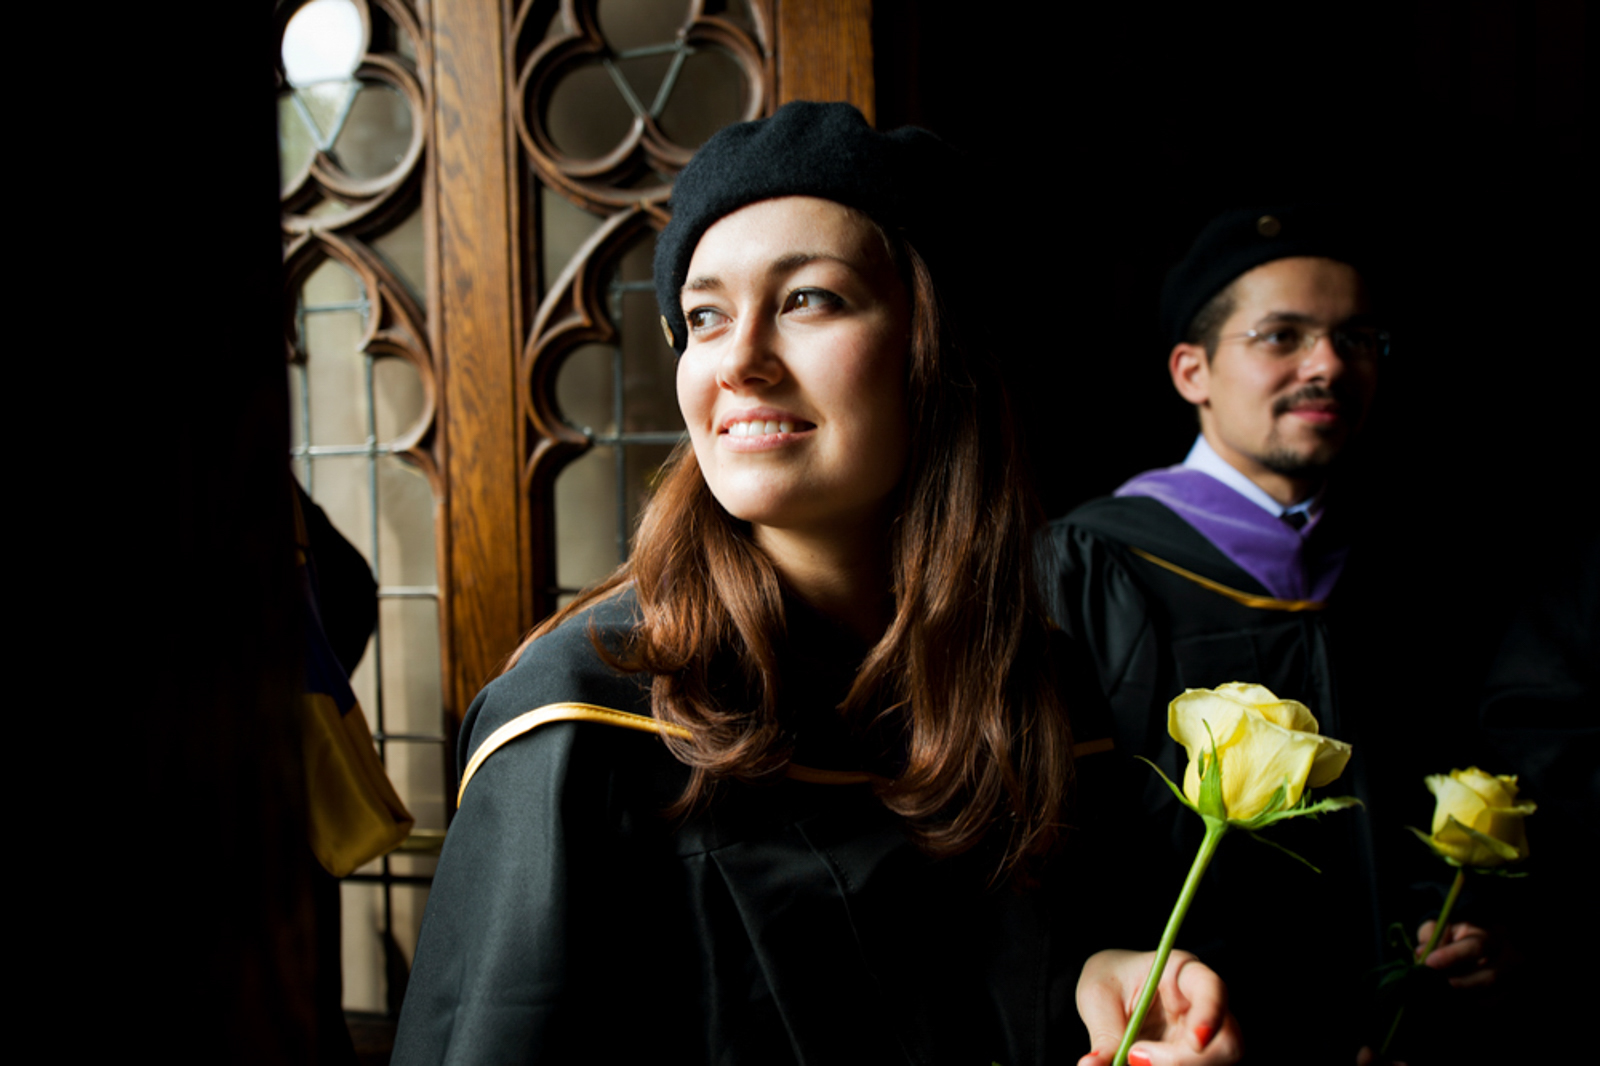 Graduating students in dim lit room female student in foreground holding flower smiling